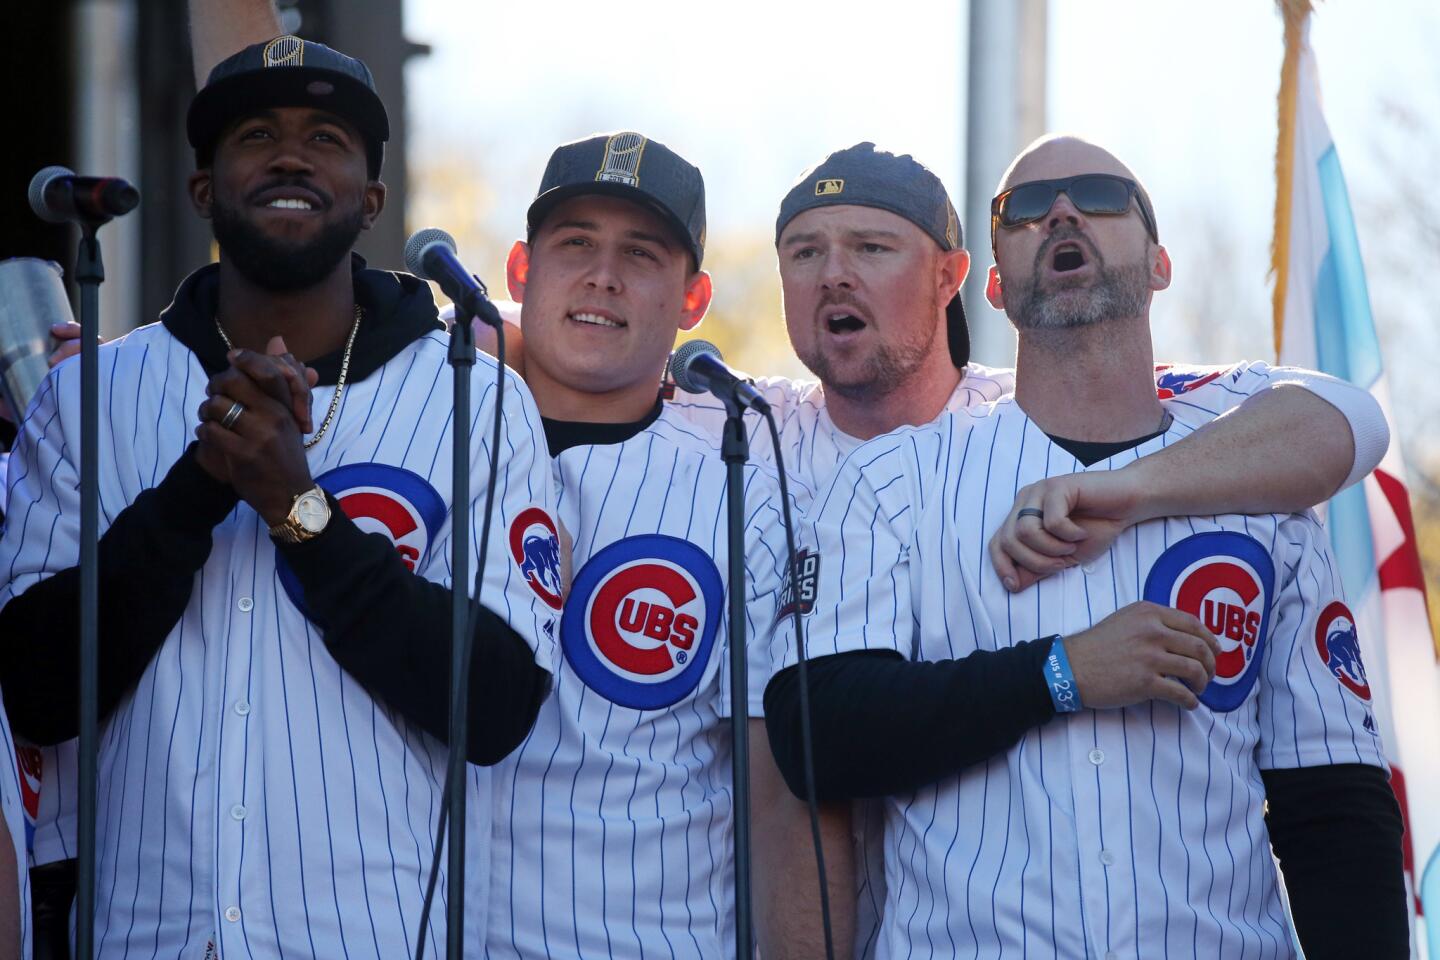 Hey Chicago Cubs fans, former six-year Cubs' outfielder Corey